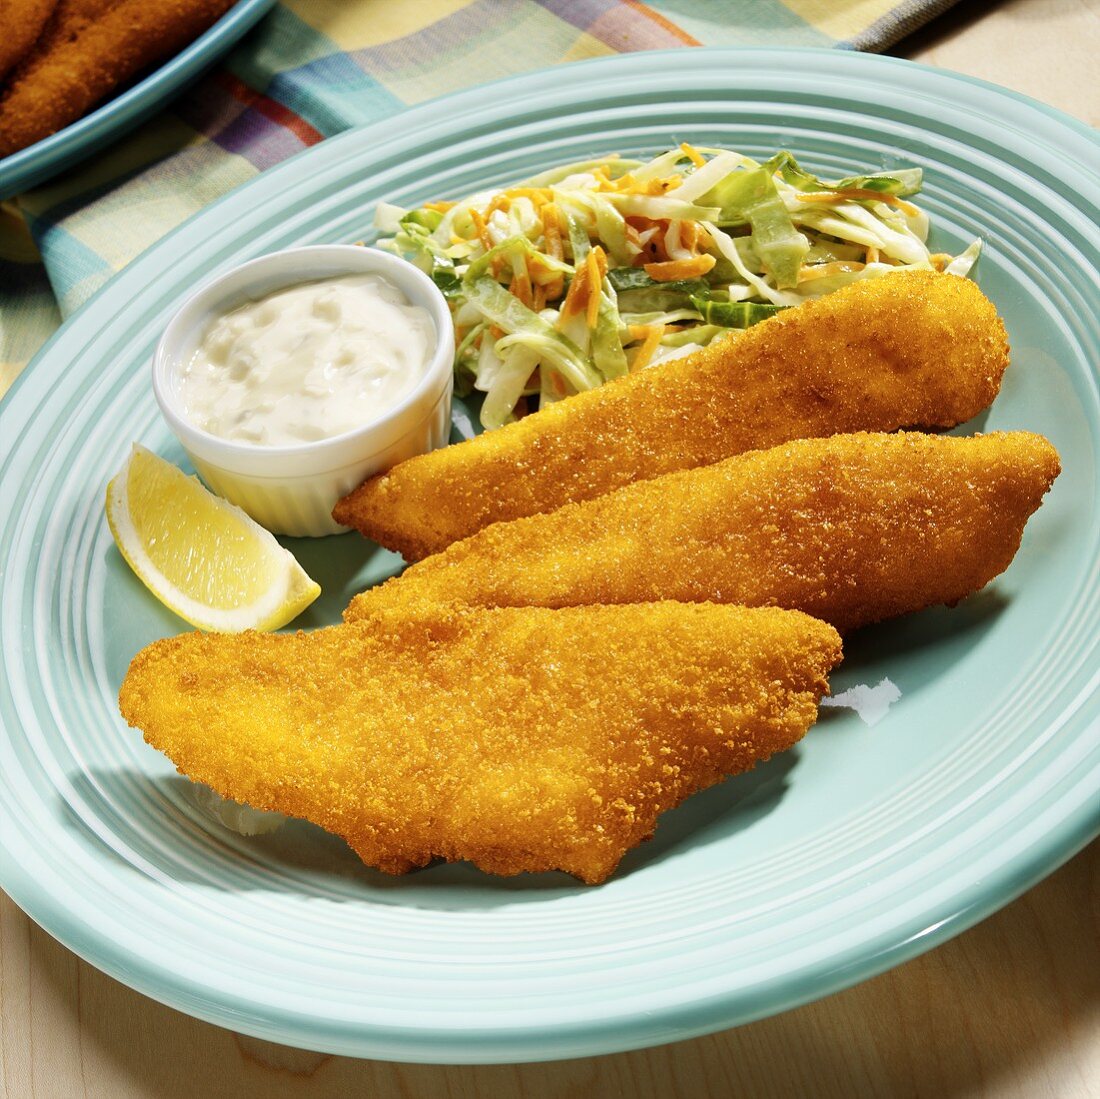 Deep-fried perch fillets with coleslaw and tartare sauce